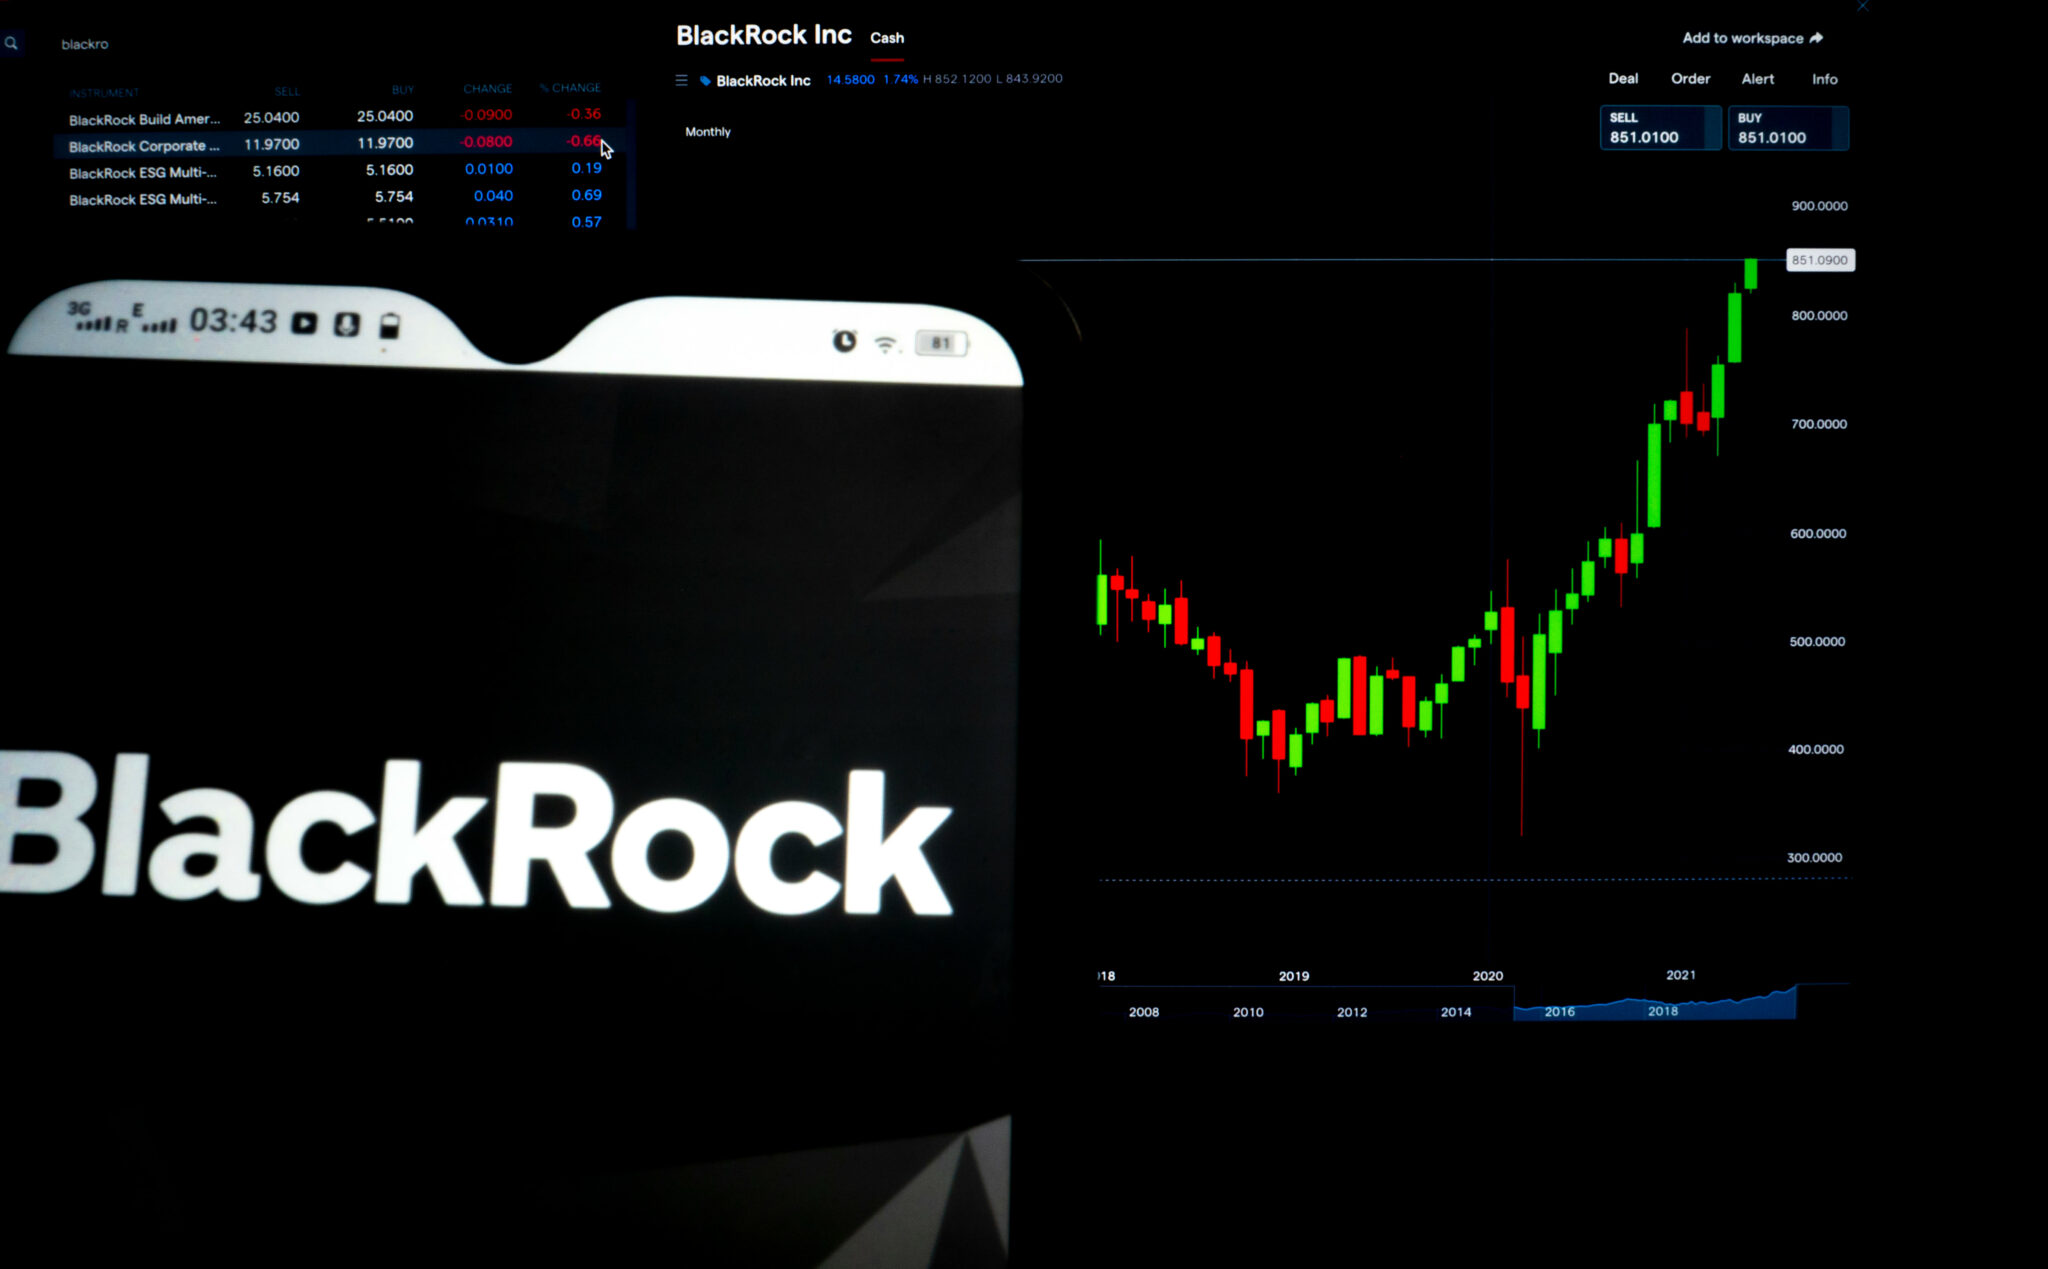 BlackRock Makes Move On Ethereum ETF, Files With the SEC